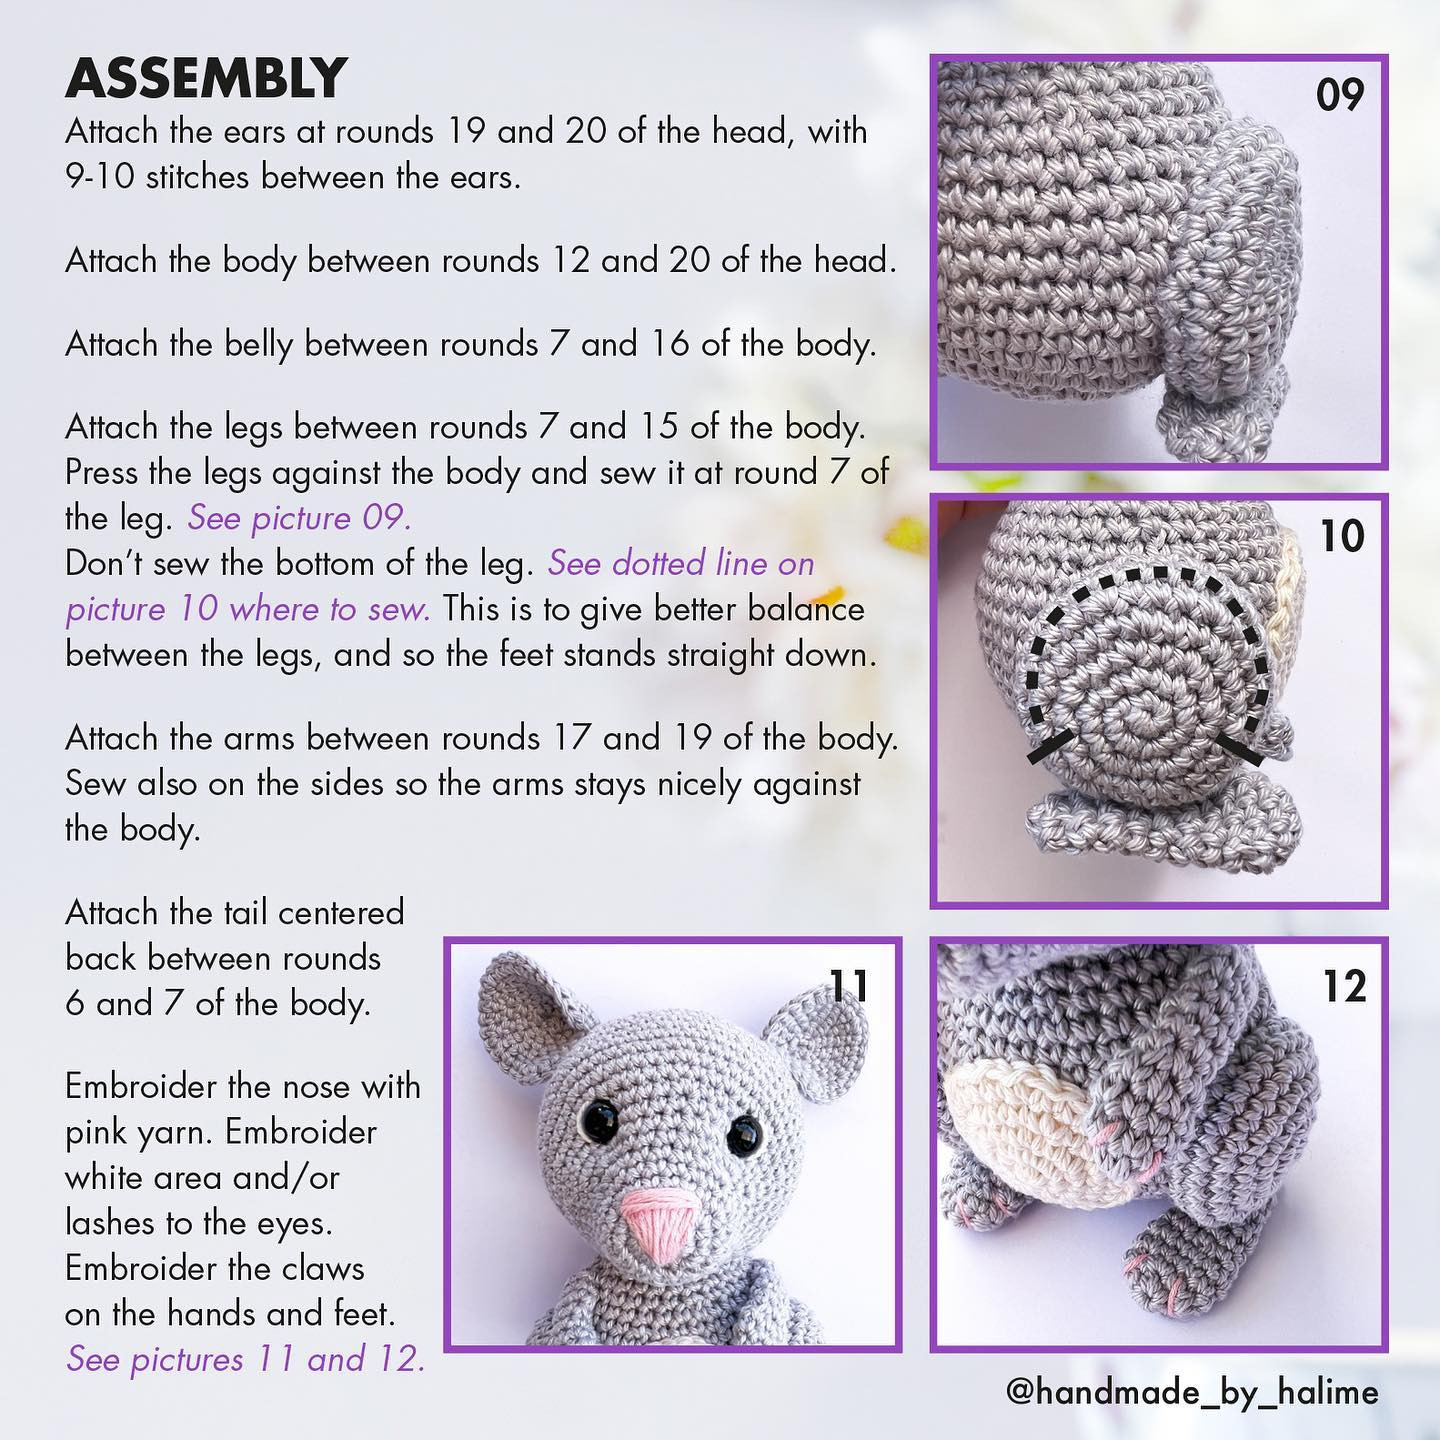 Gray and white belly crochet pattern